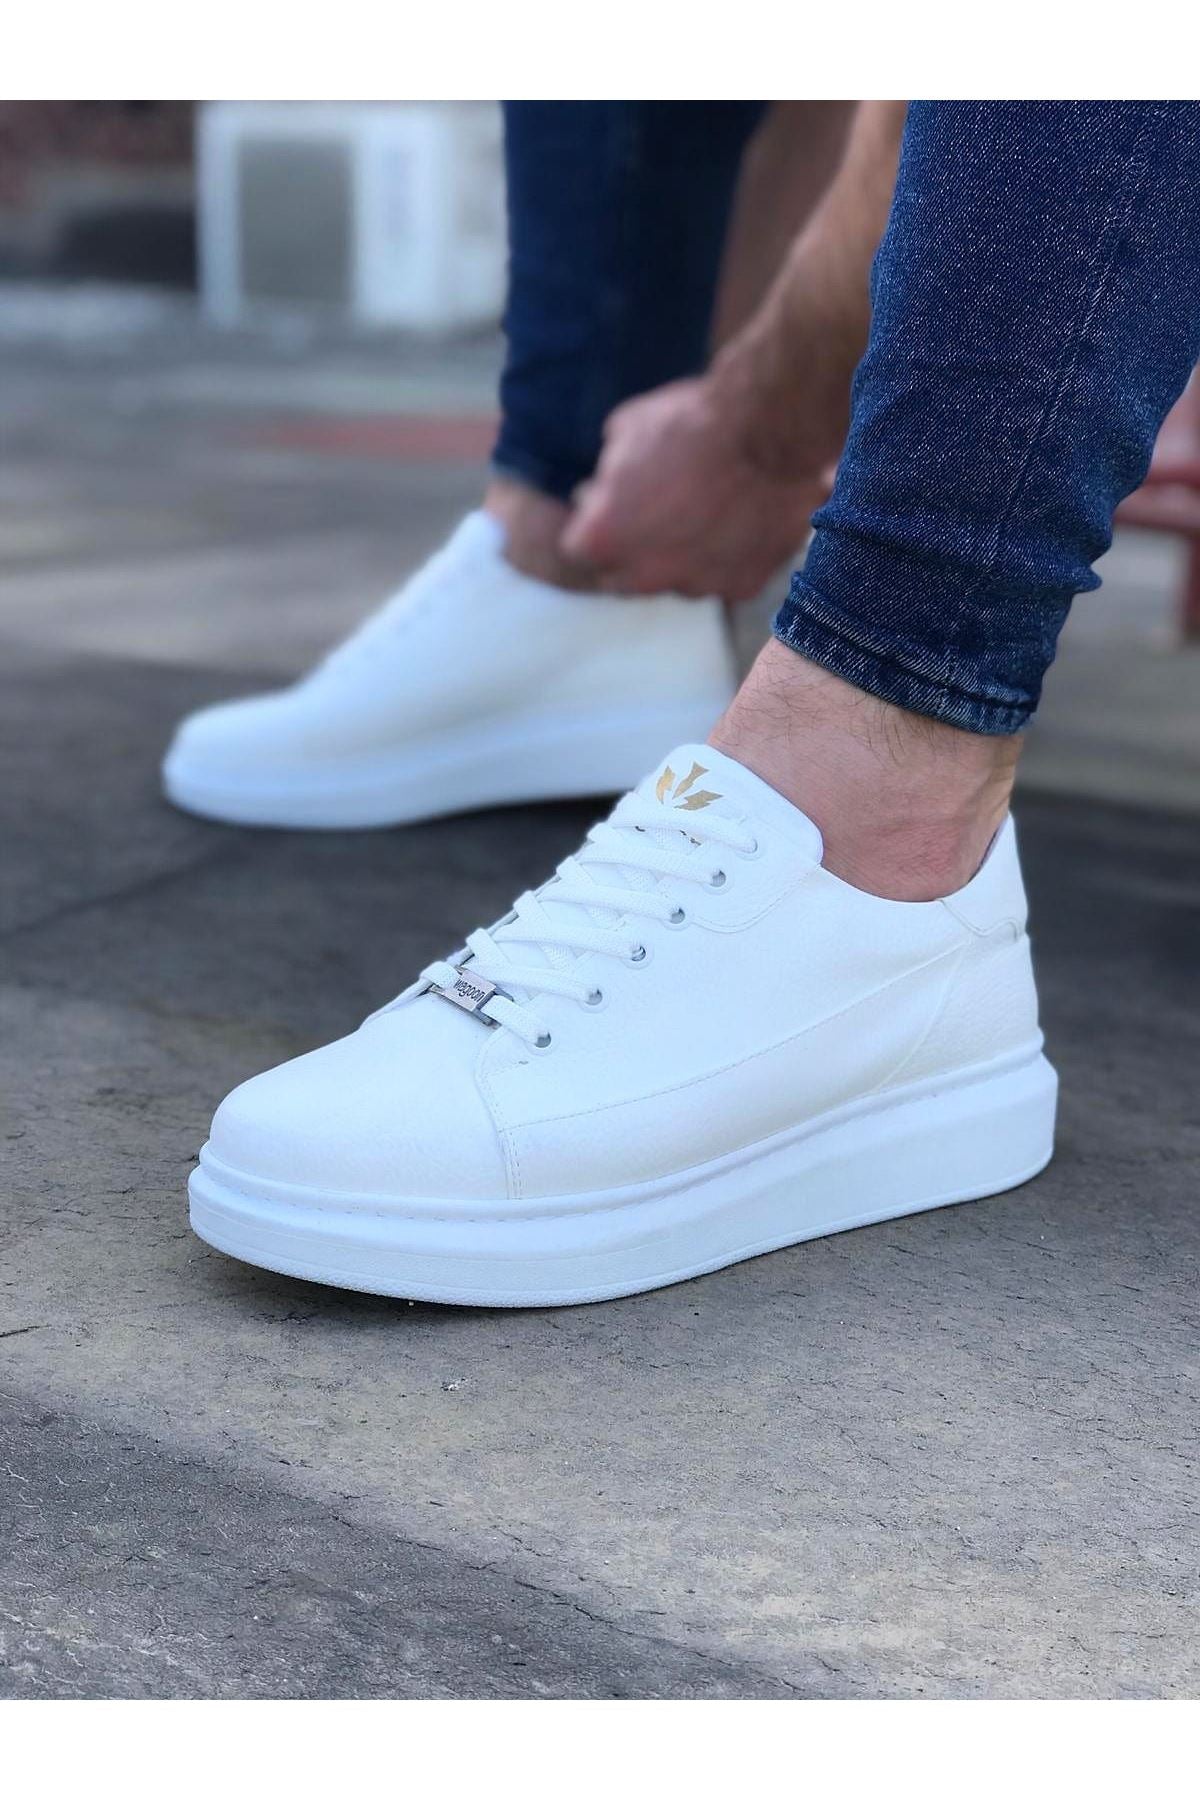 WG028 White Lace-Up Thick Sole Casual Men's Shoes - STREETMODE™